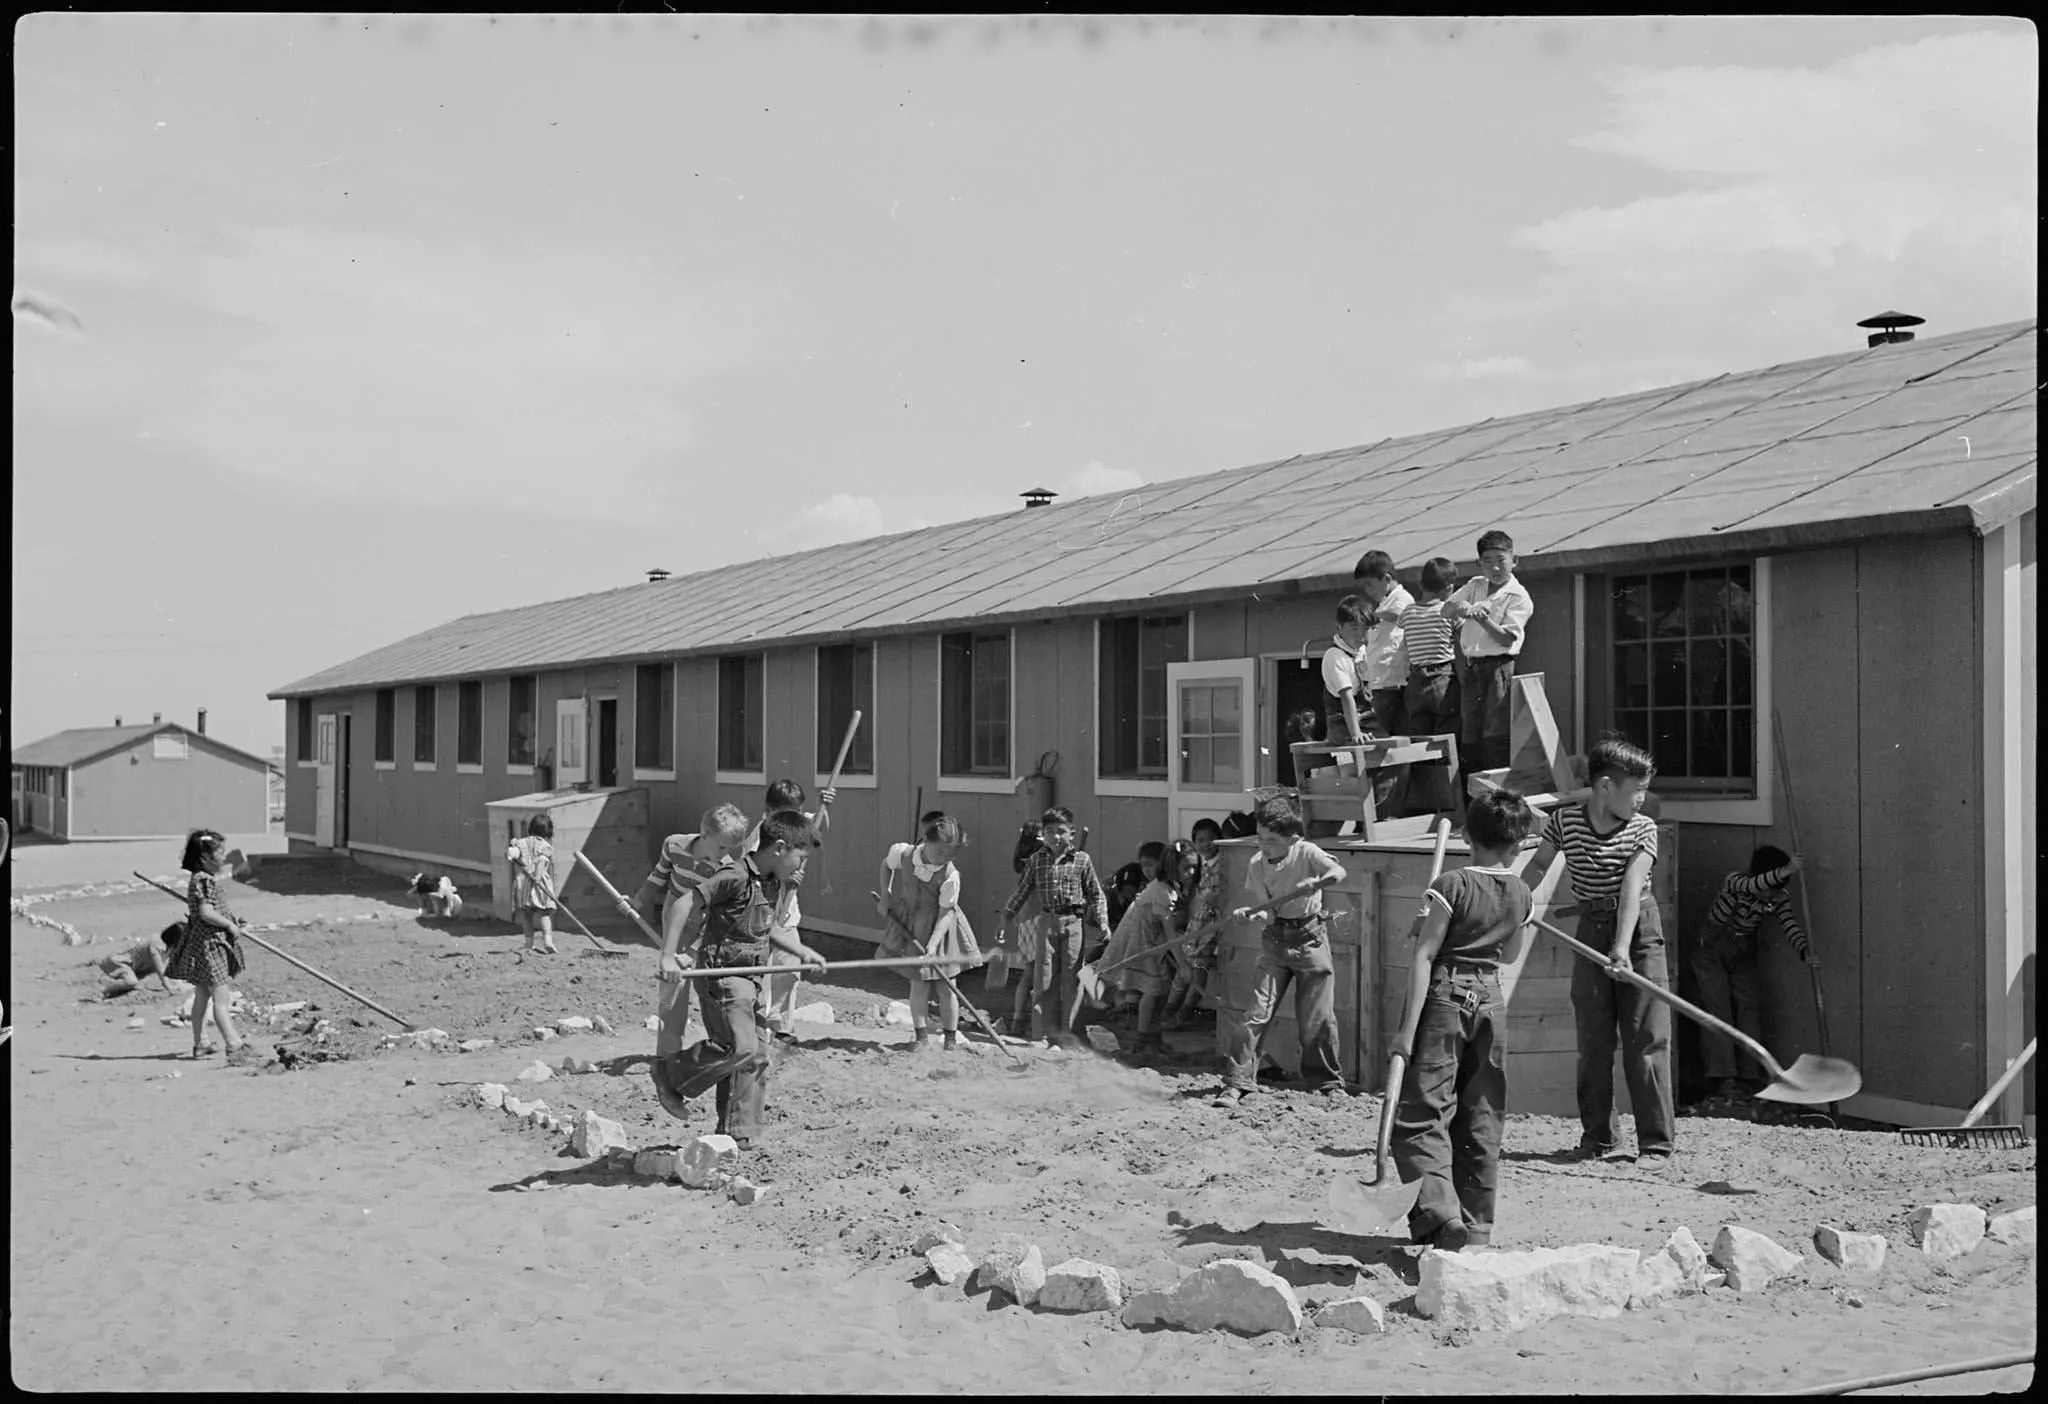 Young children working in the World War II Japanese internment camps